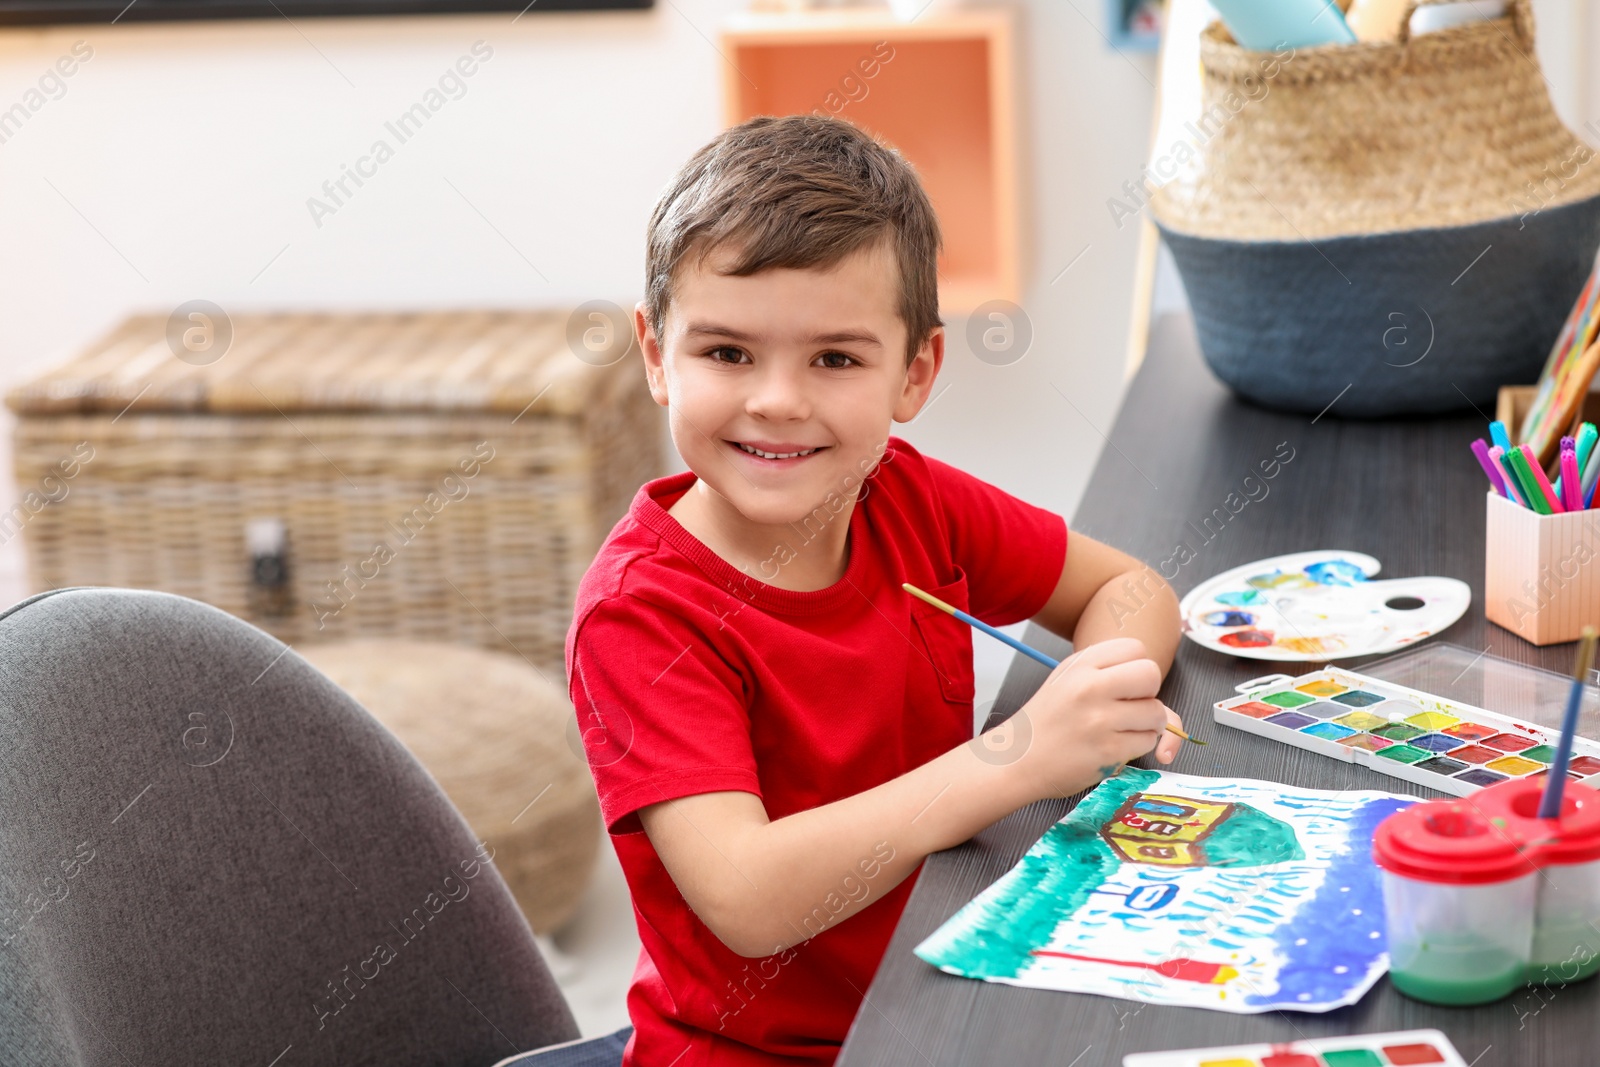 Photo of Little child painting at table in room